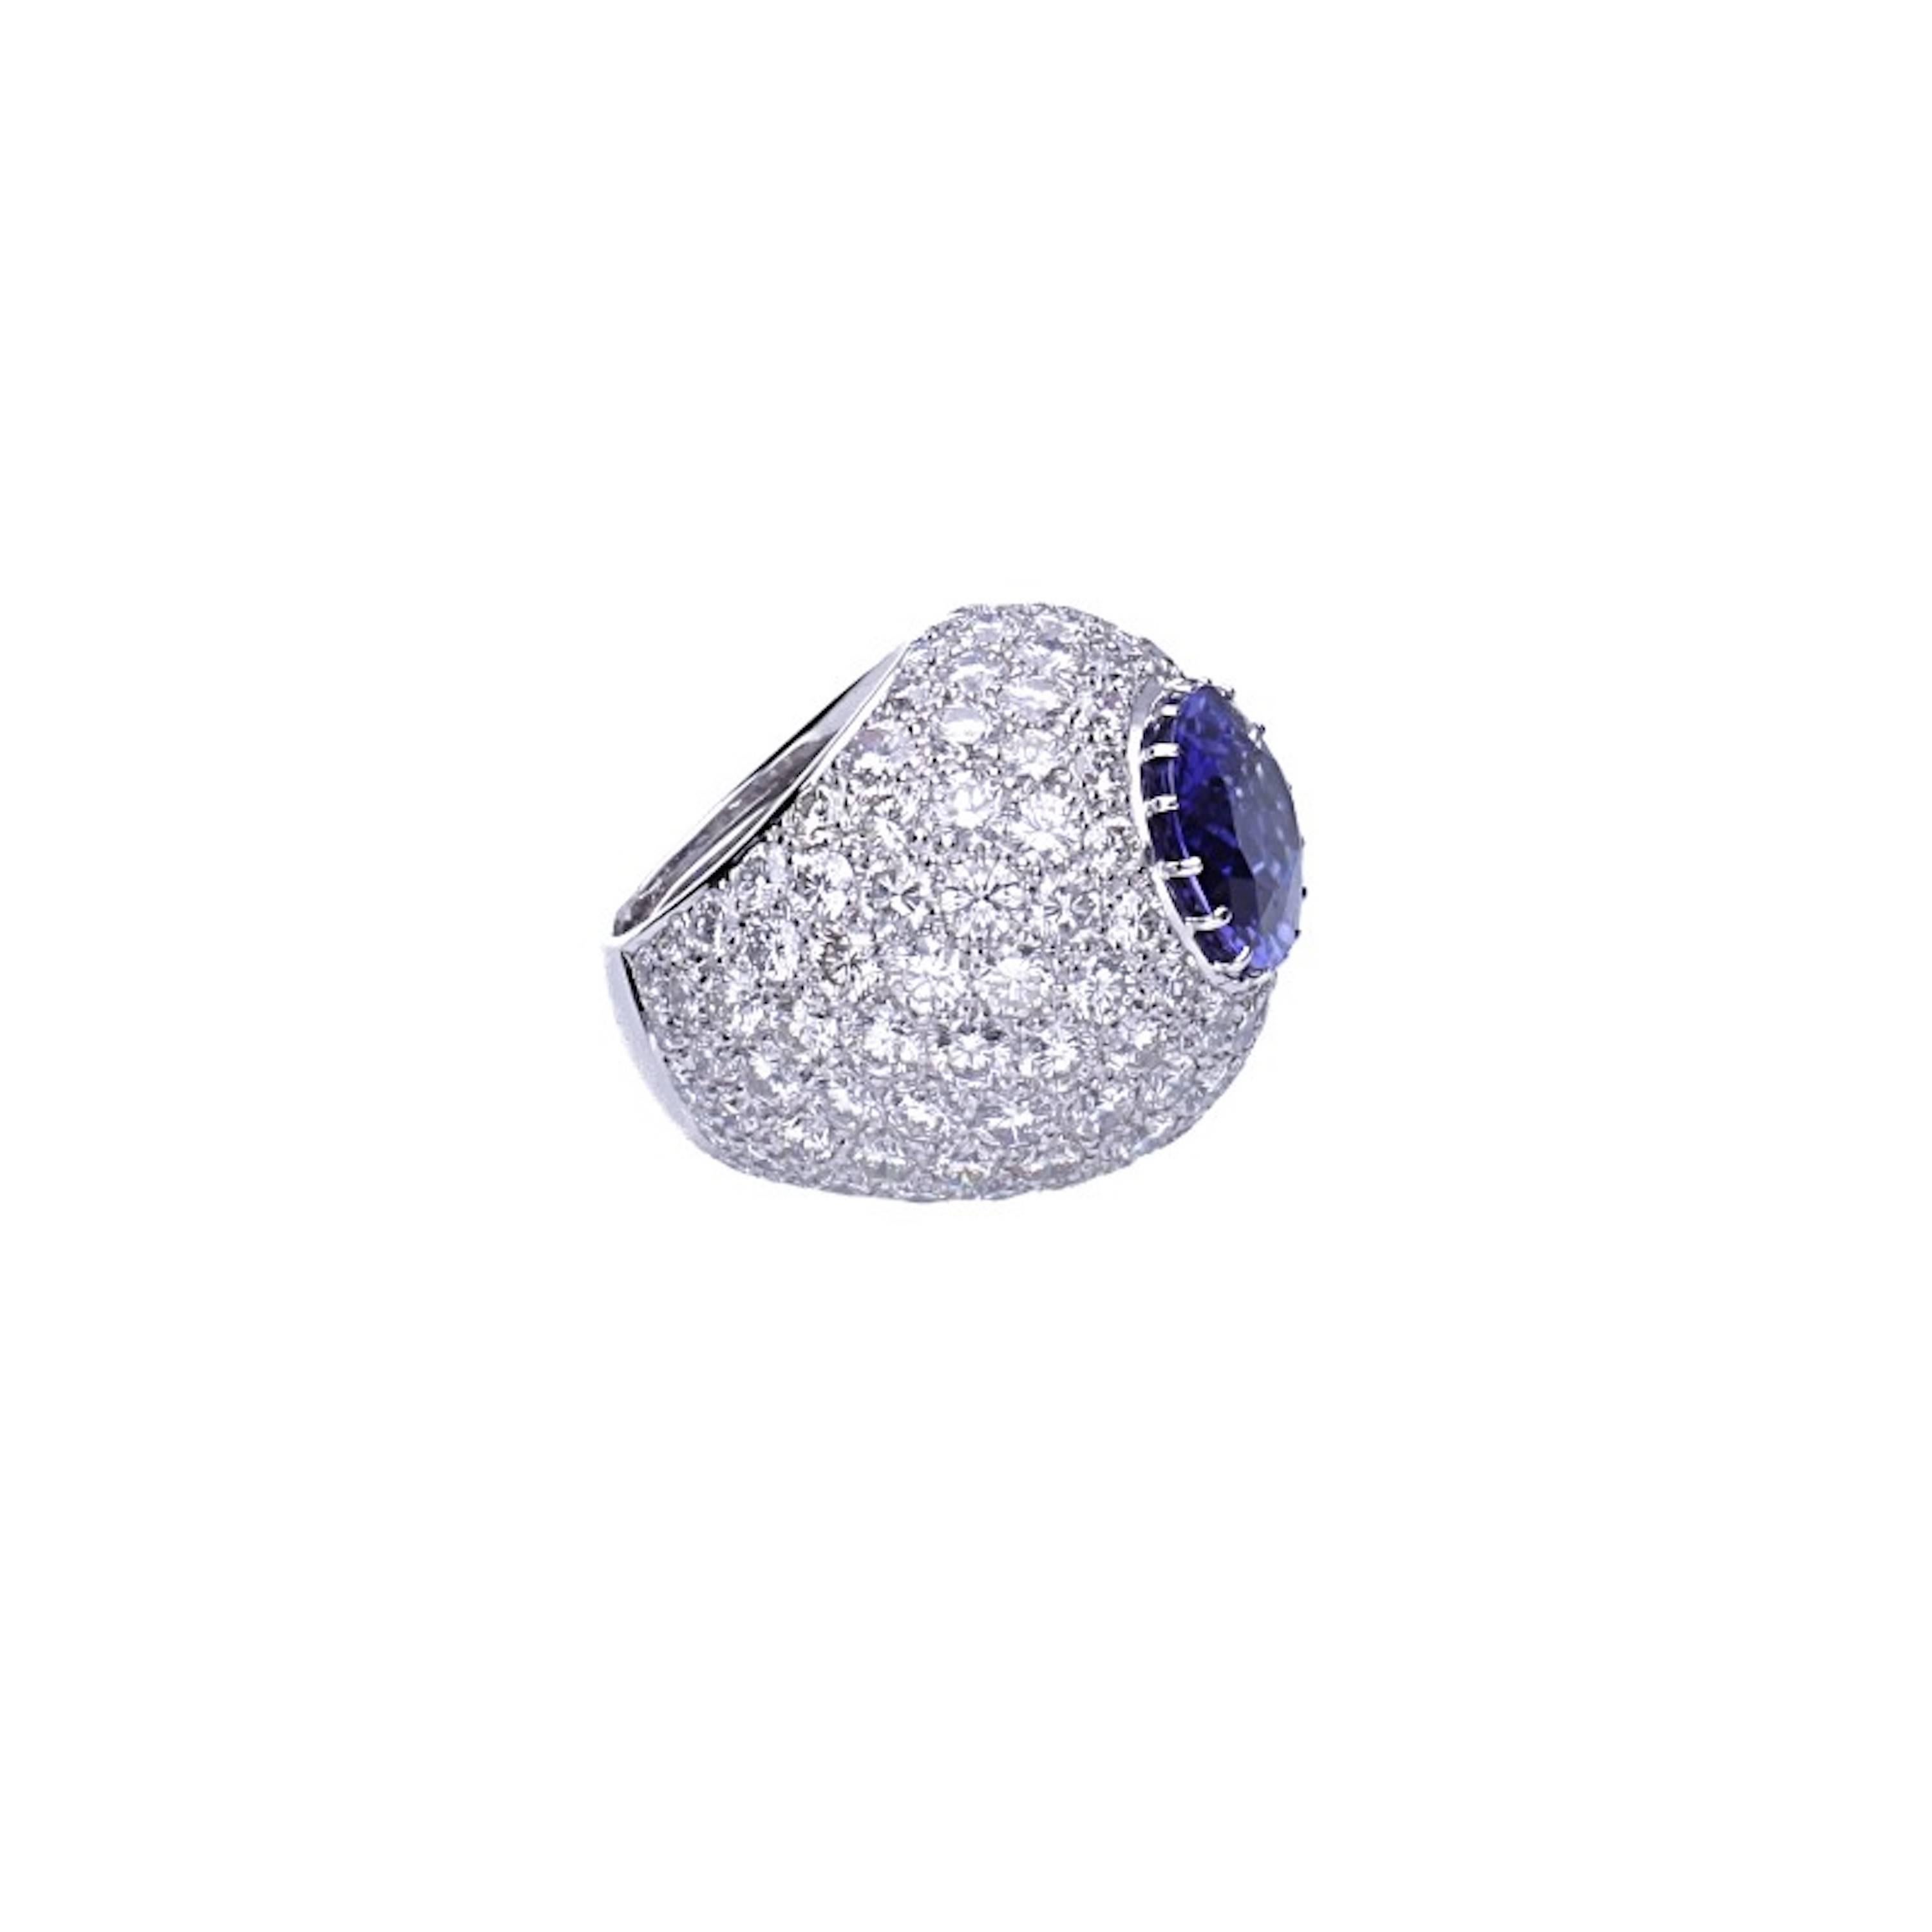 Exquisite 18 kt. white gold ring, with 18.90 carat of diamonds and 12.37 carat of tanzanite.
Completely hand-made in Italy.